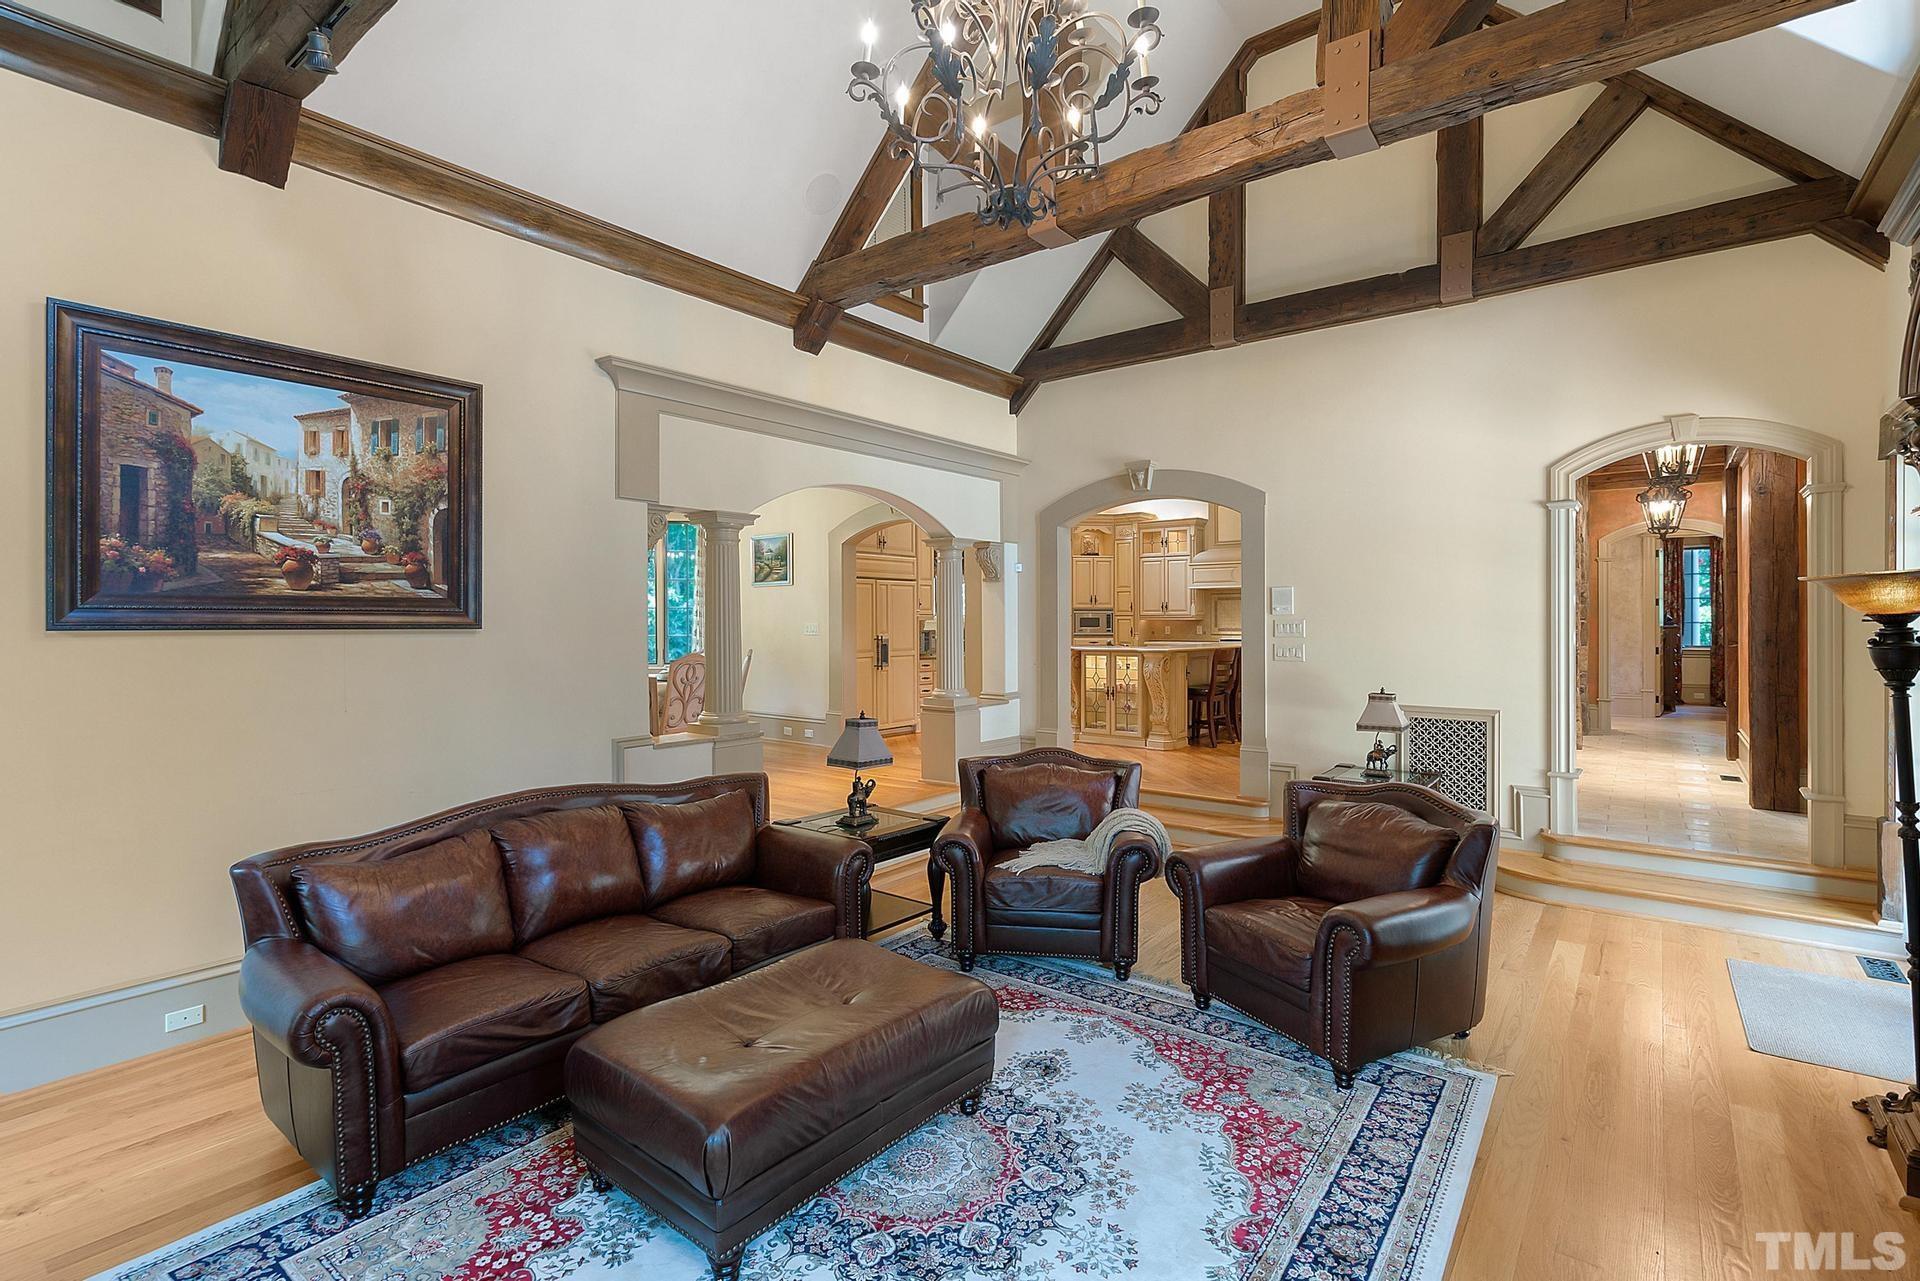 Exposed wooden hammerbeams and the stone fireplace  exude comfort.